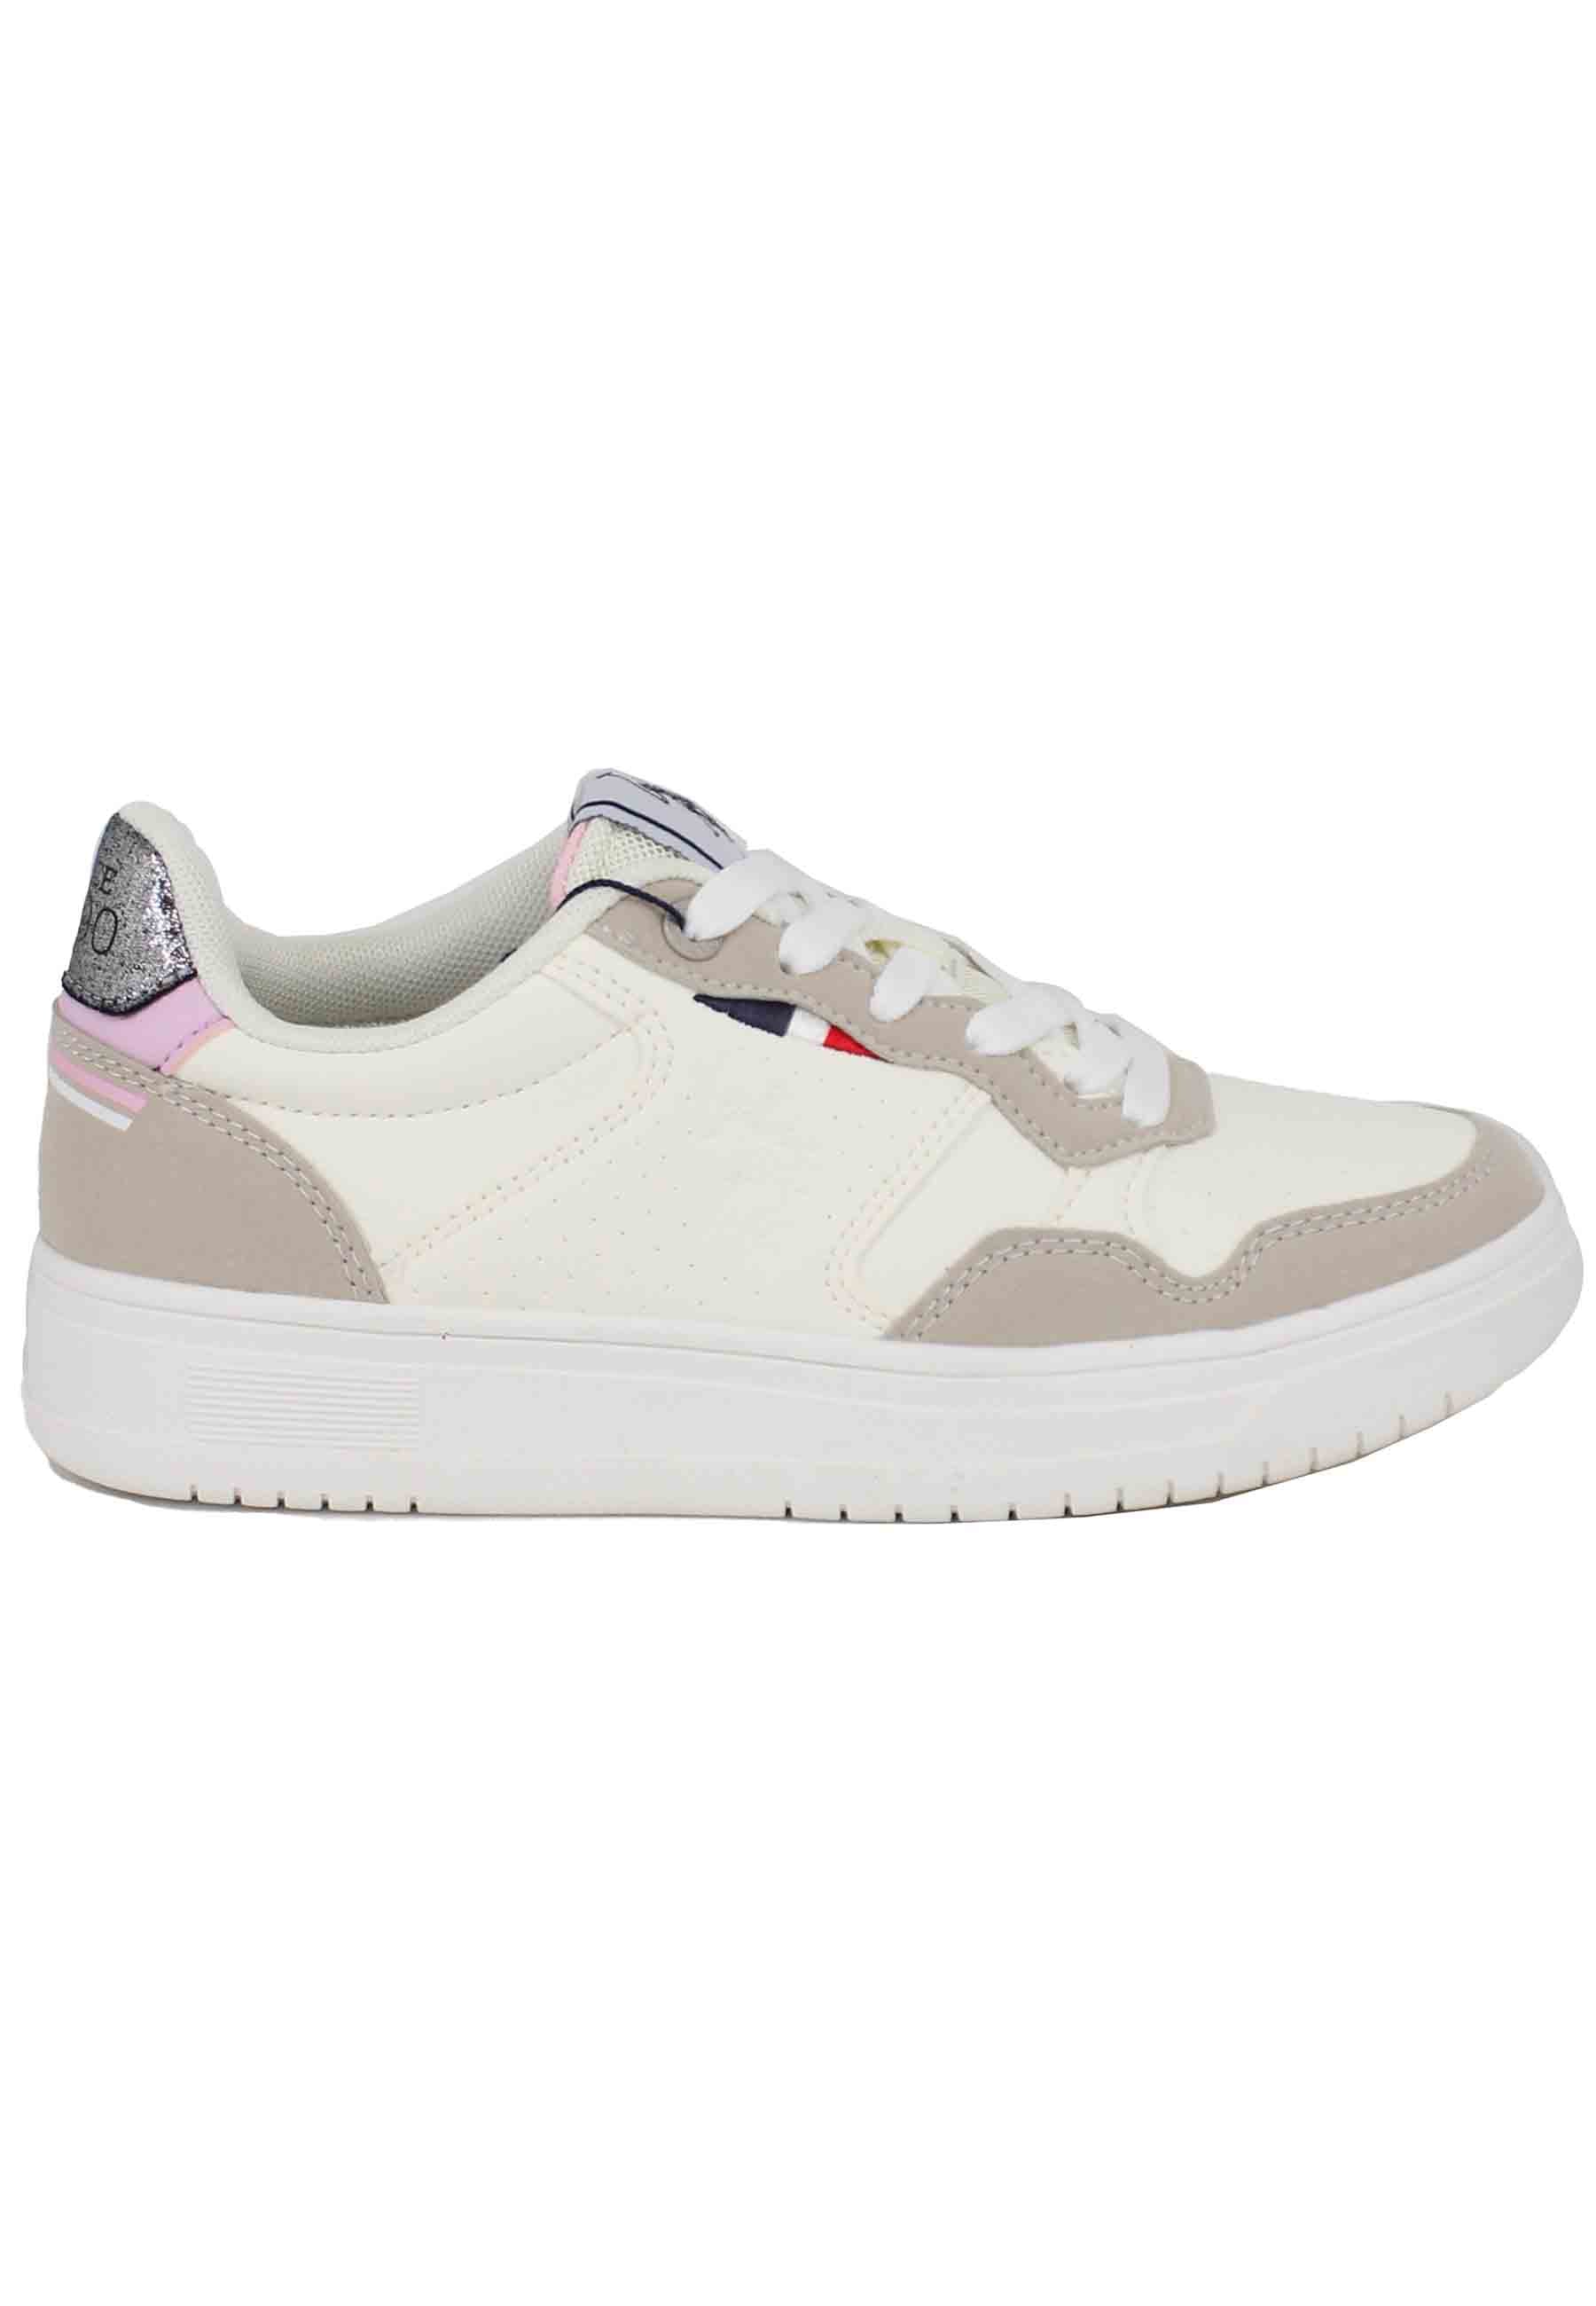 Sneakers donna in eco pelle vintage bianco e nude